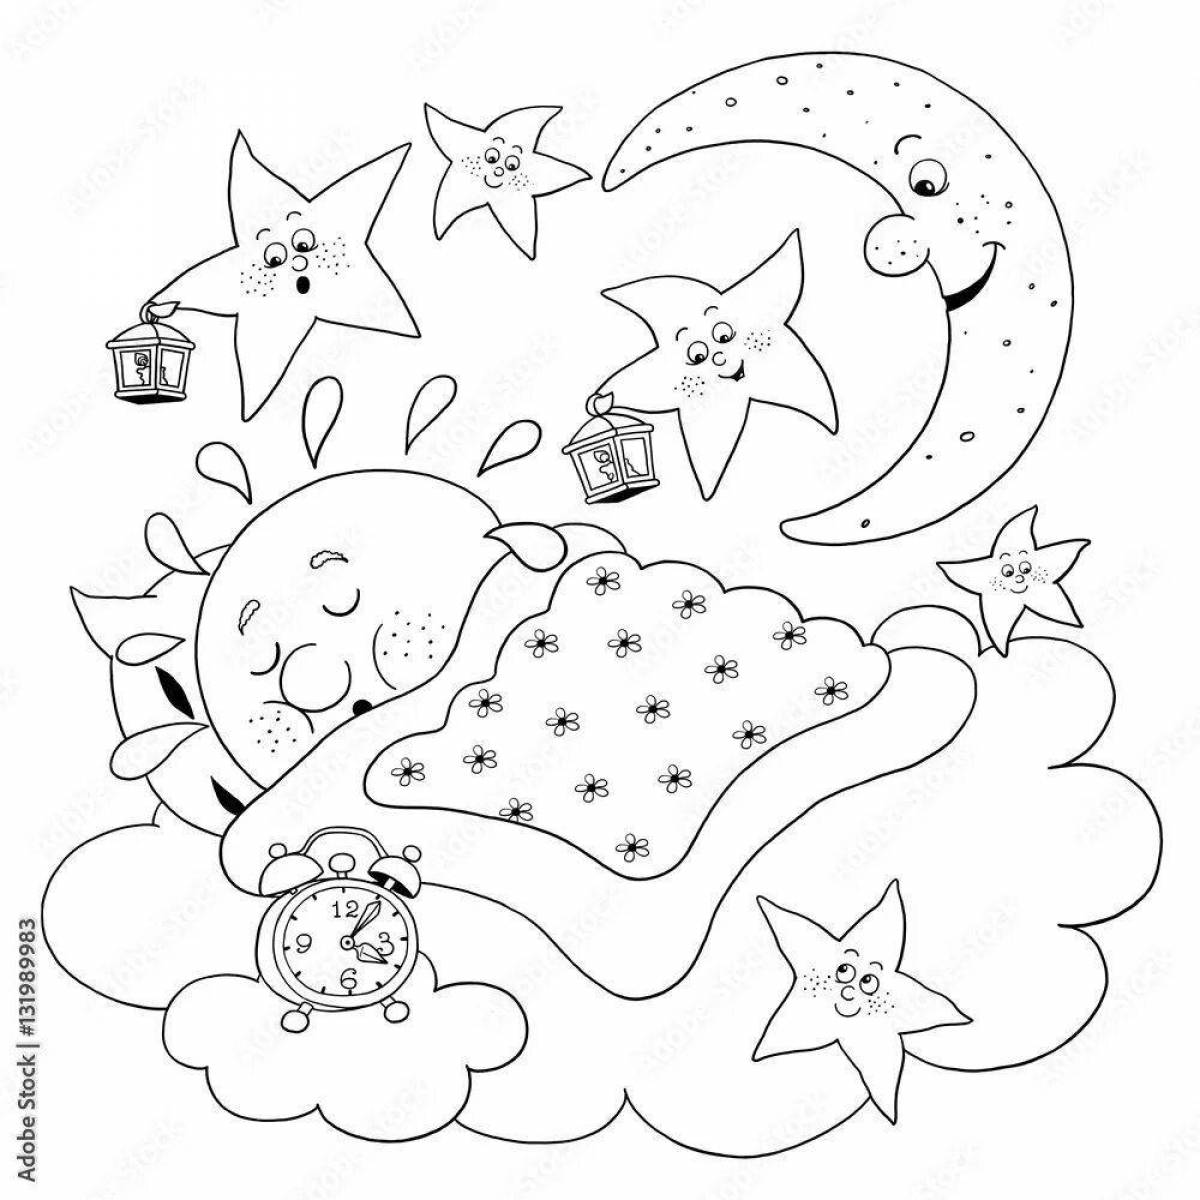 Glitter night sky coloring page